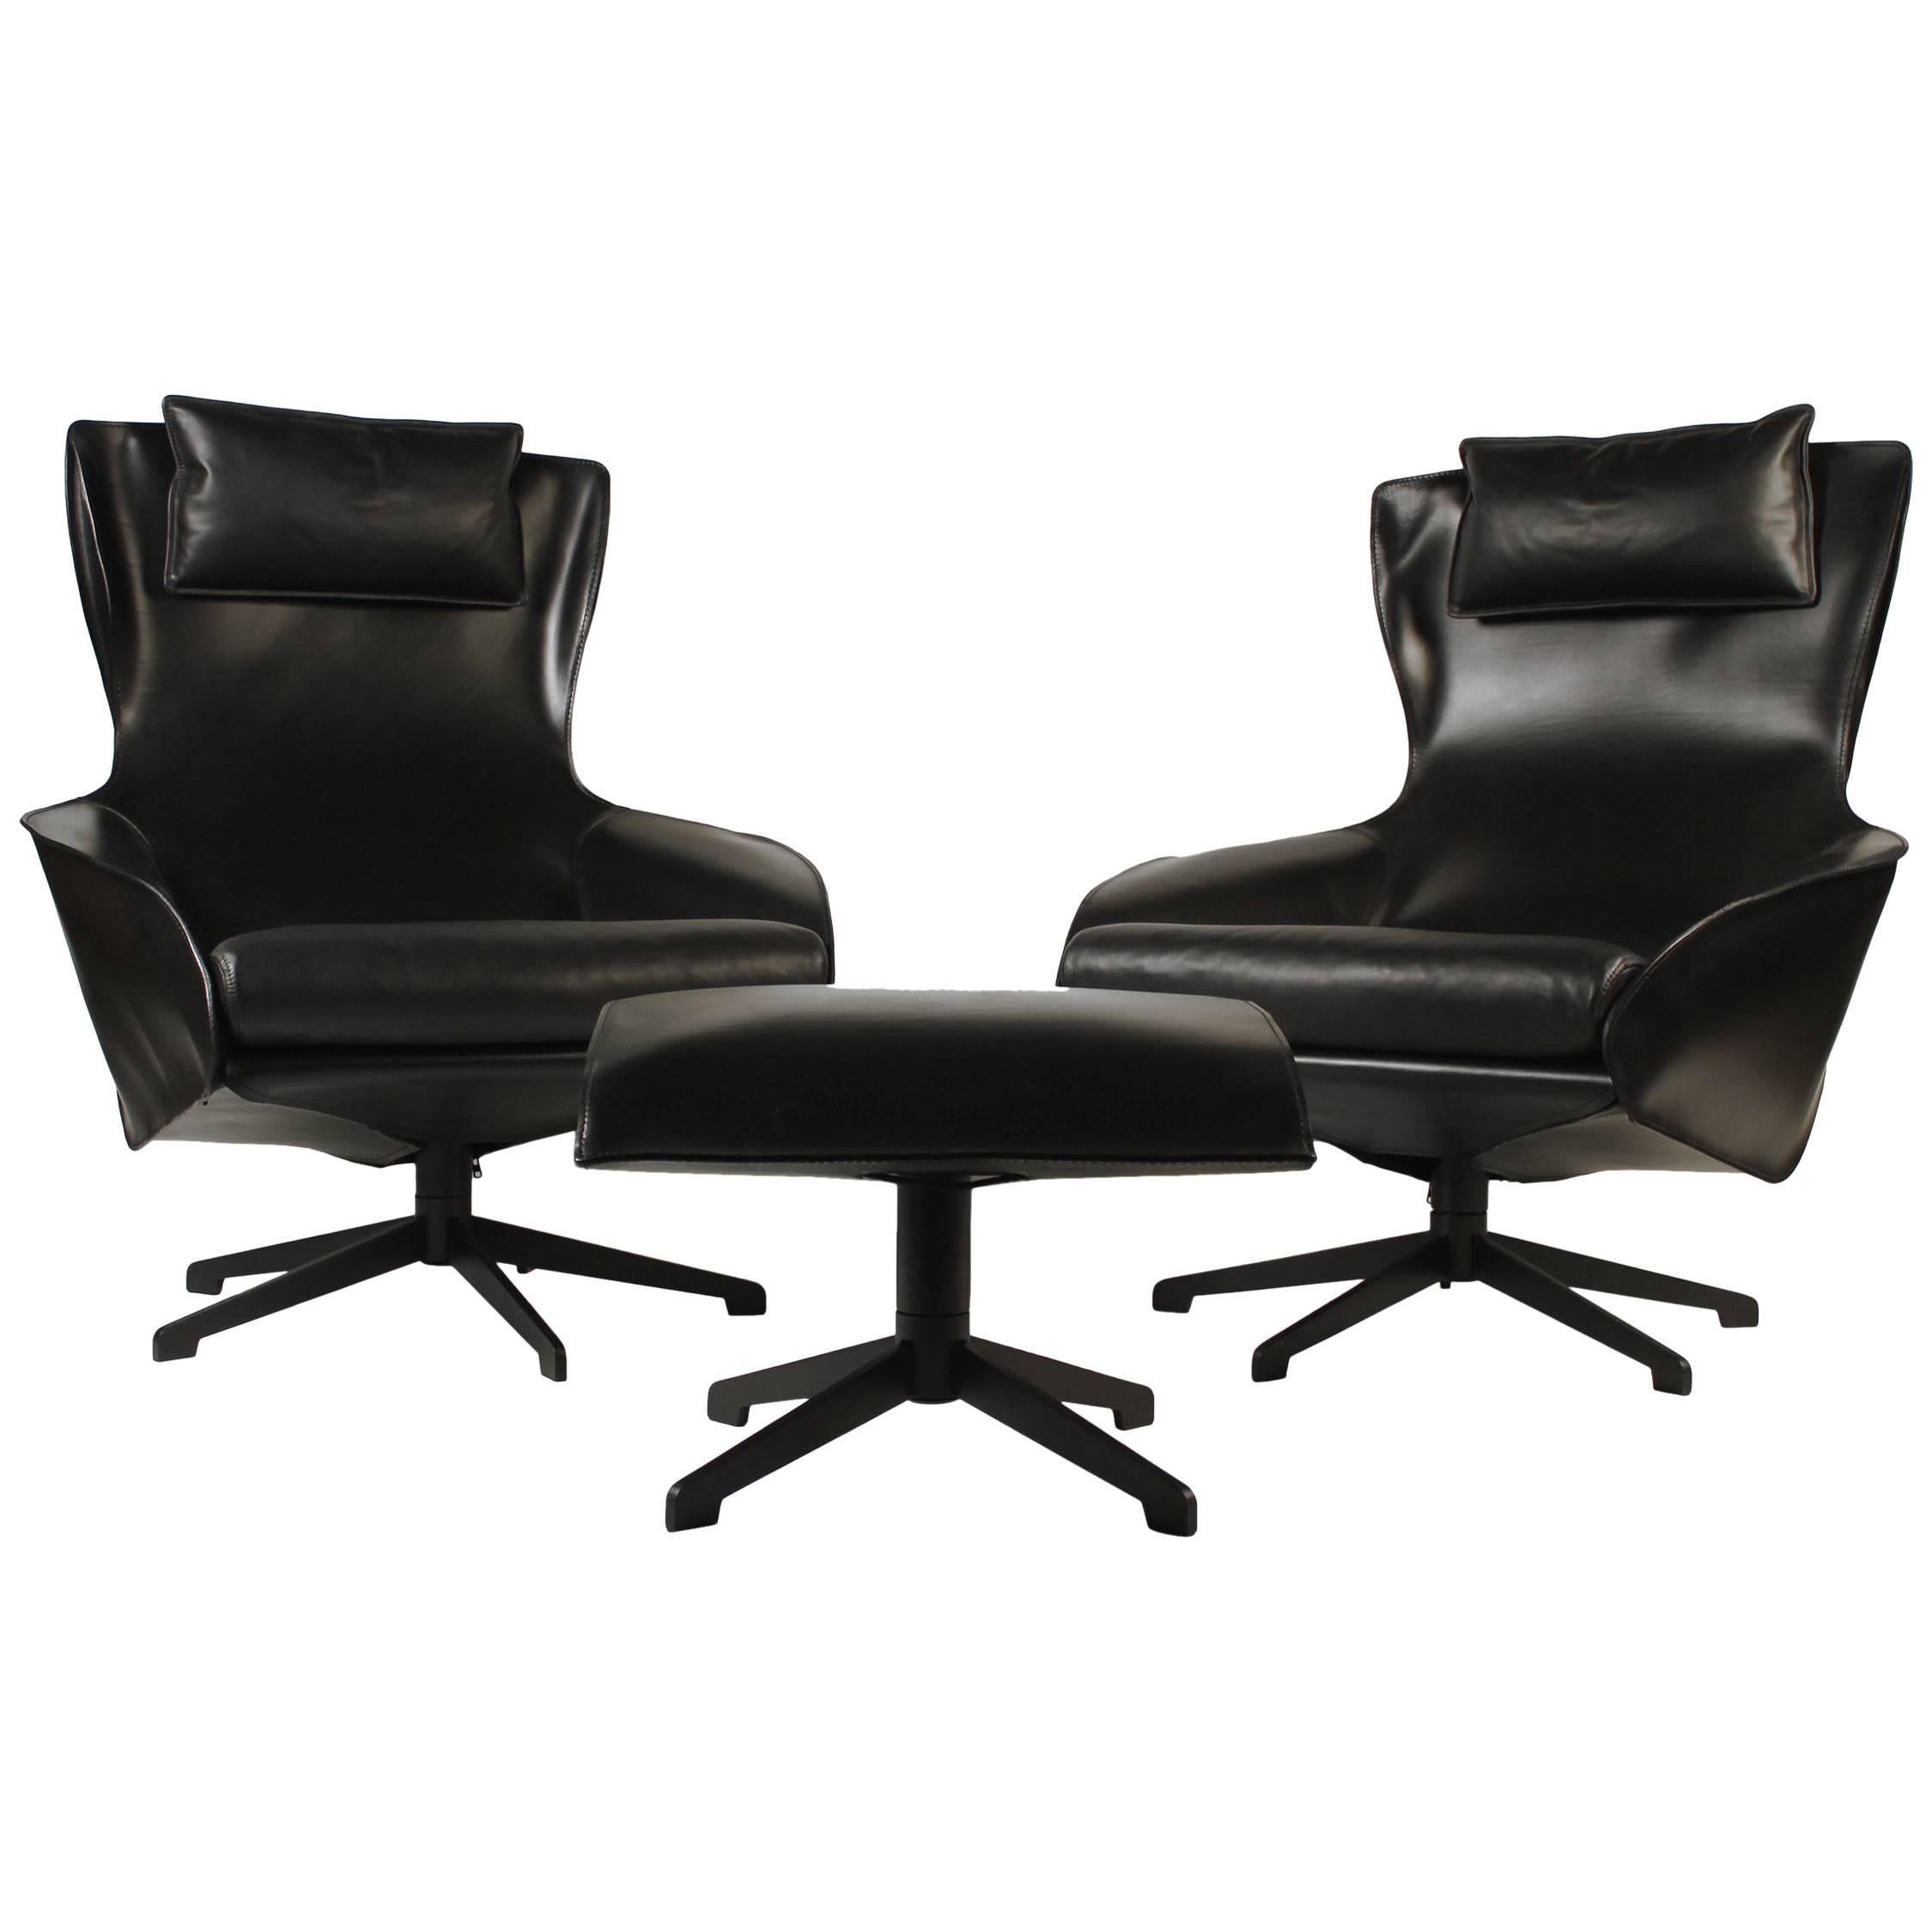 Pair of Mario Bellini Model 423 Cab Lounge Chairs with Swivel Ottoman by Cassina